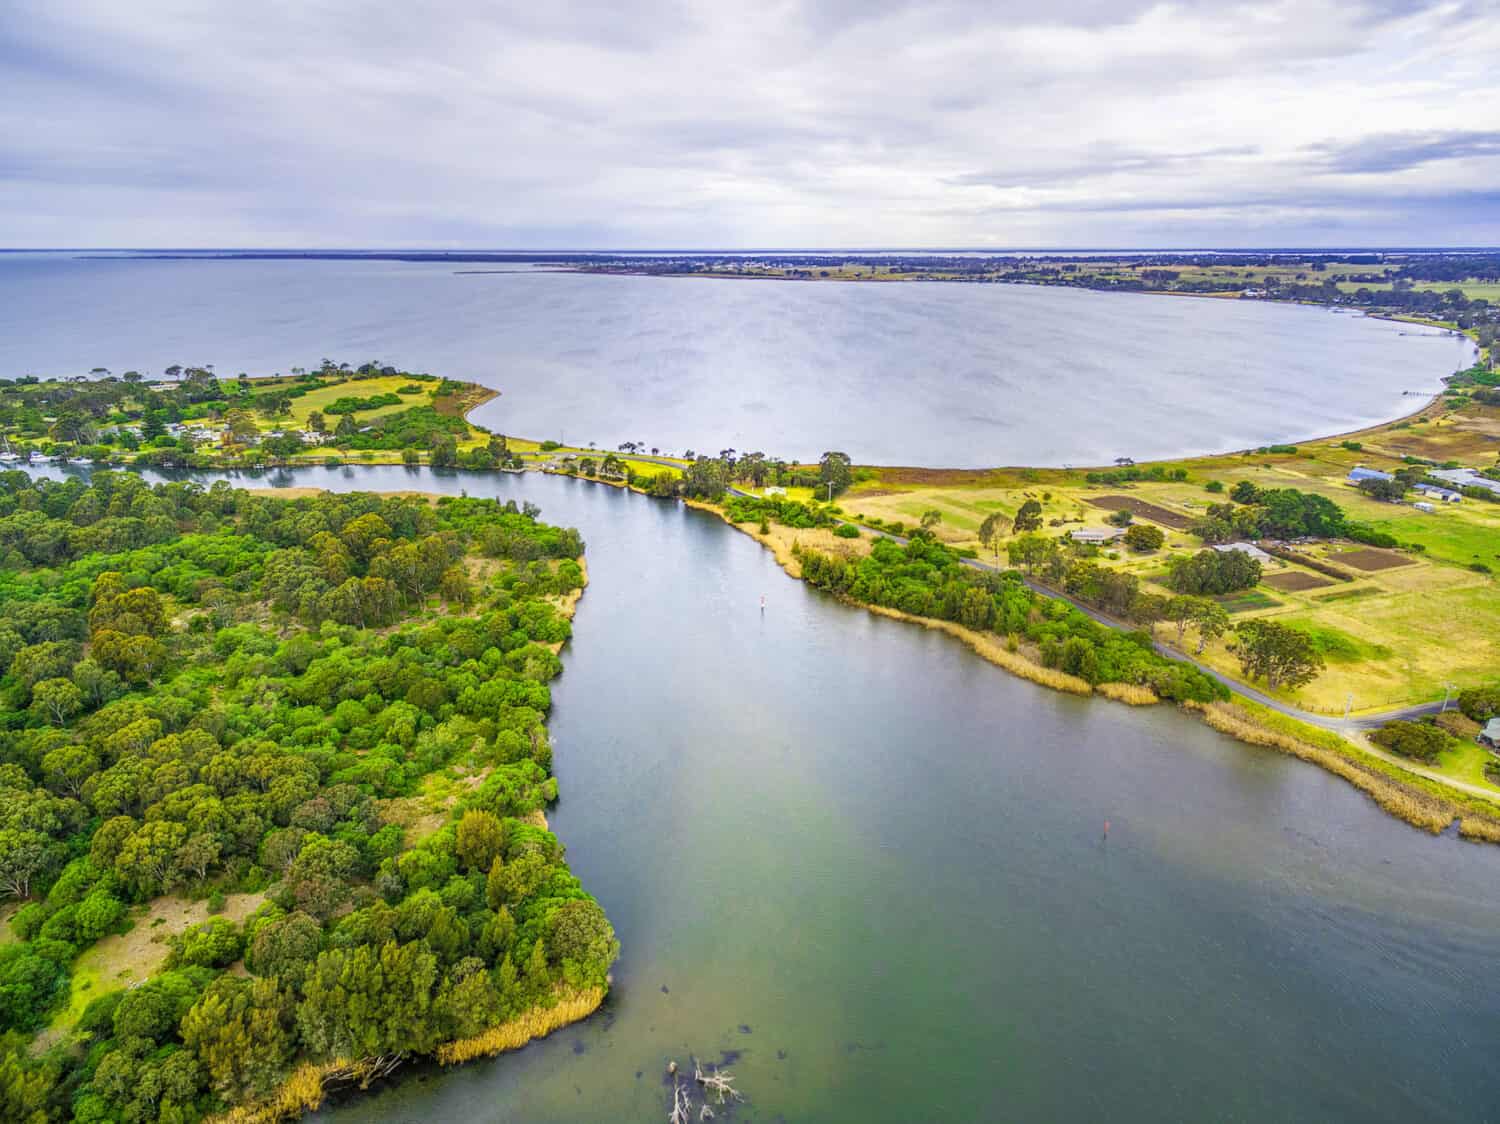 Aerial view of Jones Bay at Gippsland Lakes Reserve, Victoria, Australia. Typical Australian Landscape